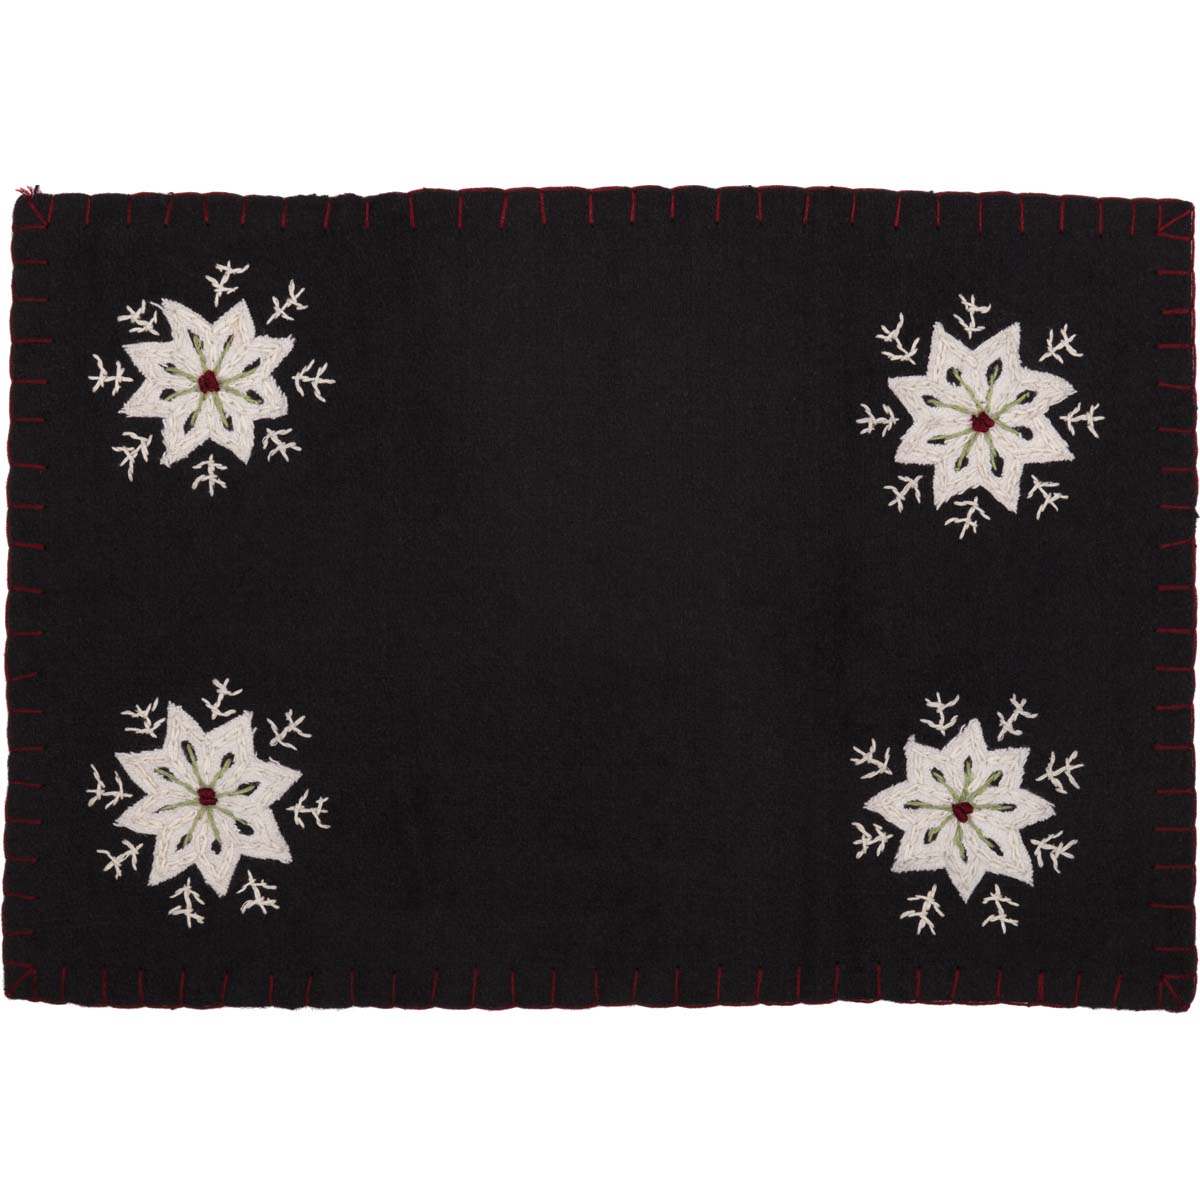 Christmas Snowflake Placemat Felt Embroidery Set 6-12x18 VHC Brands